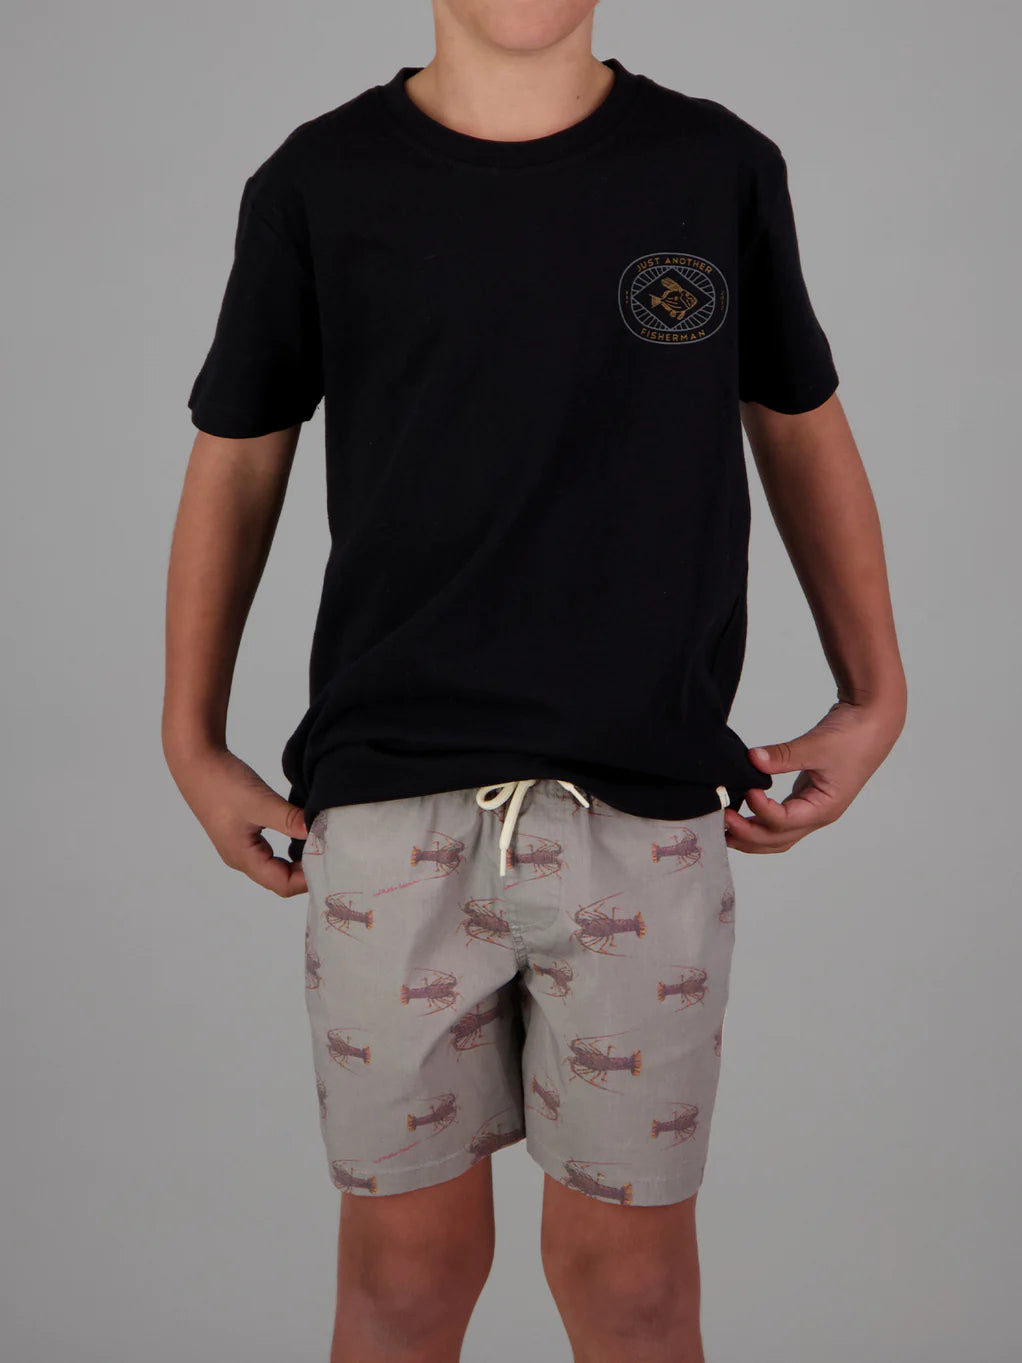 JUST ANOTHER FISHERMAN MINI CRAY SHORTS - STONE